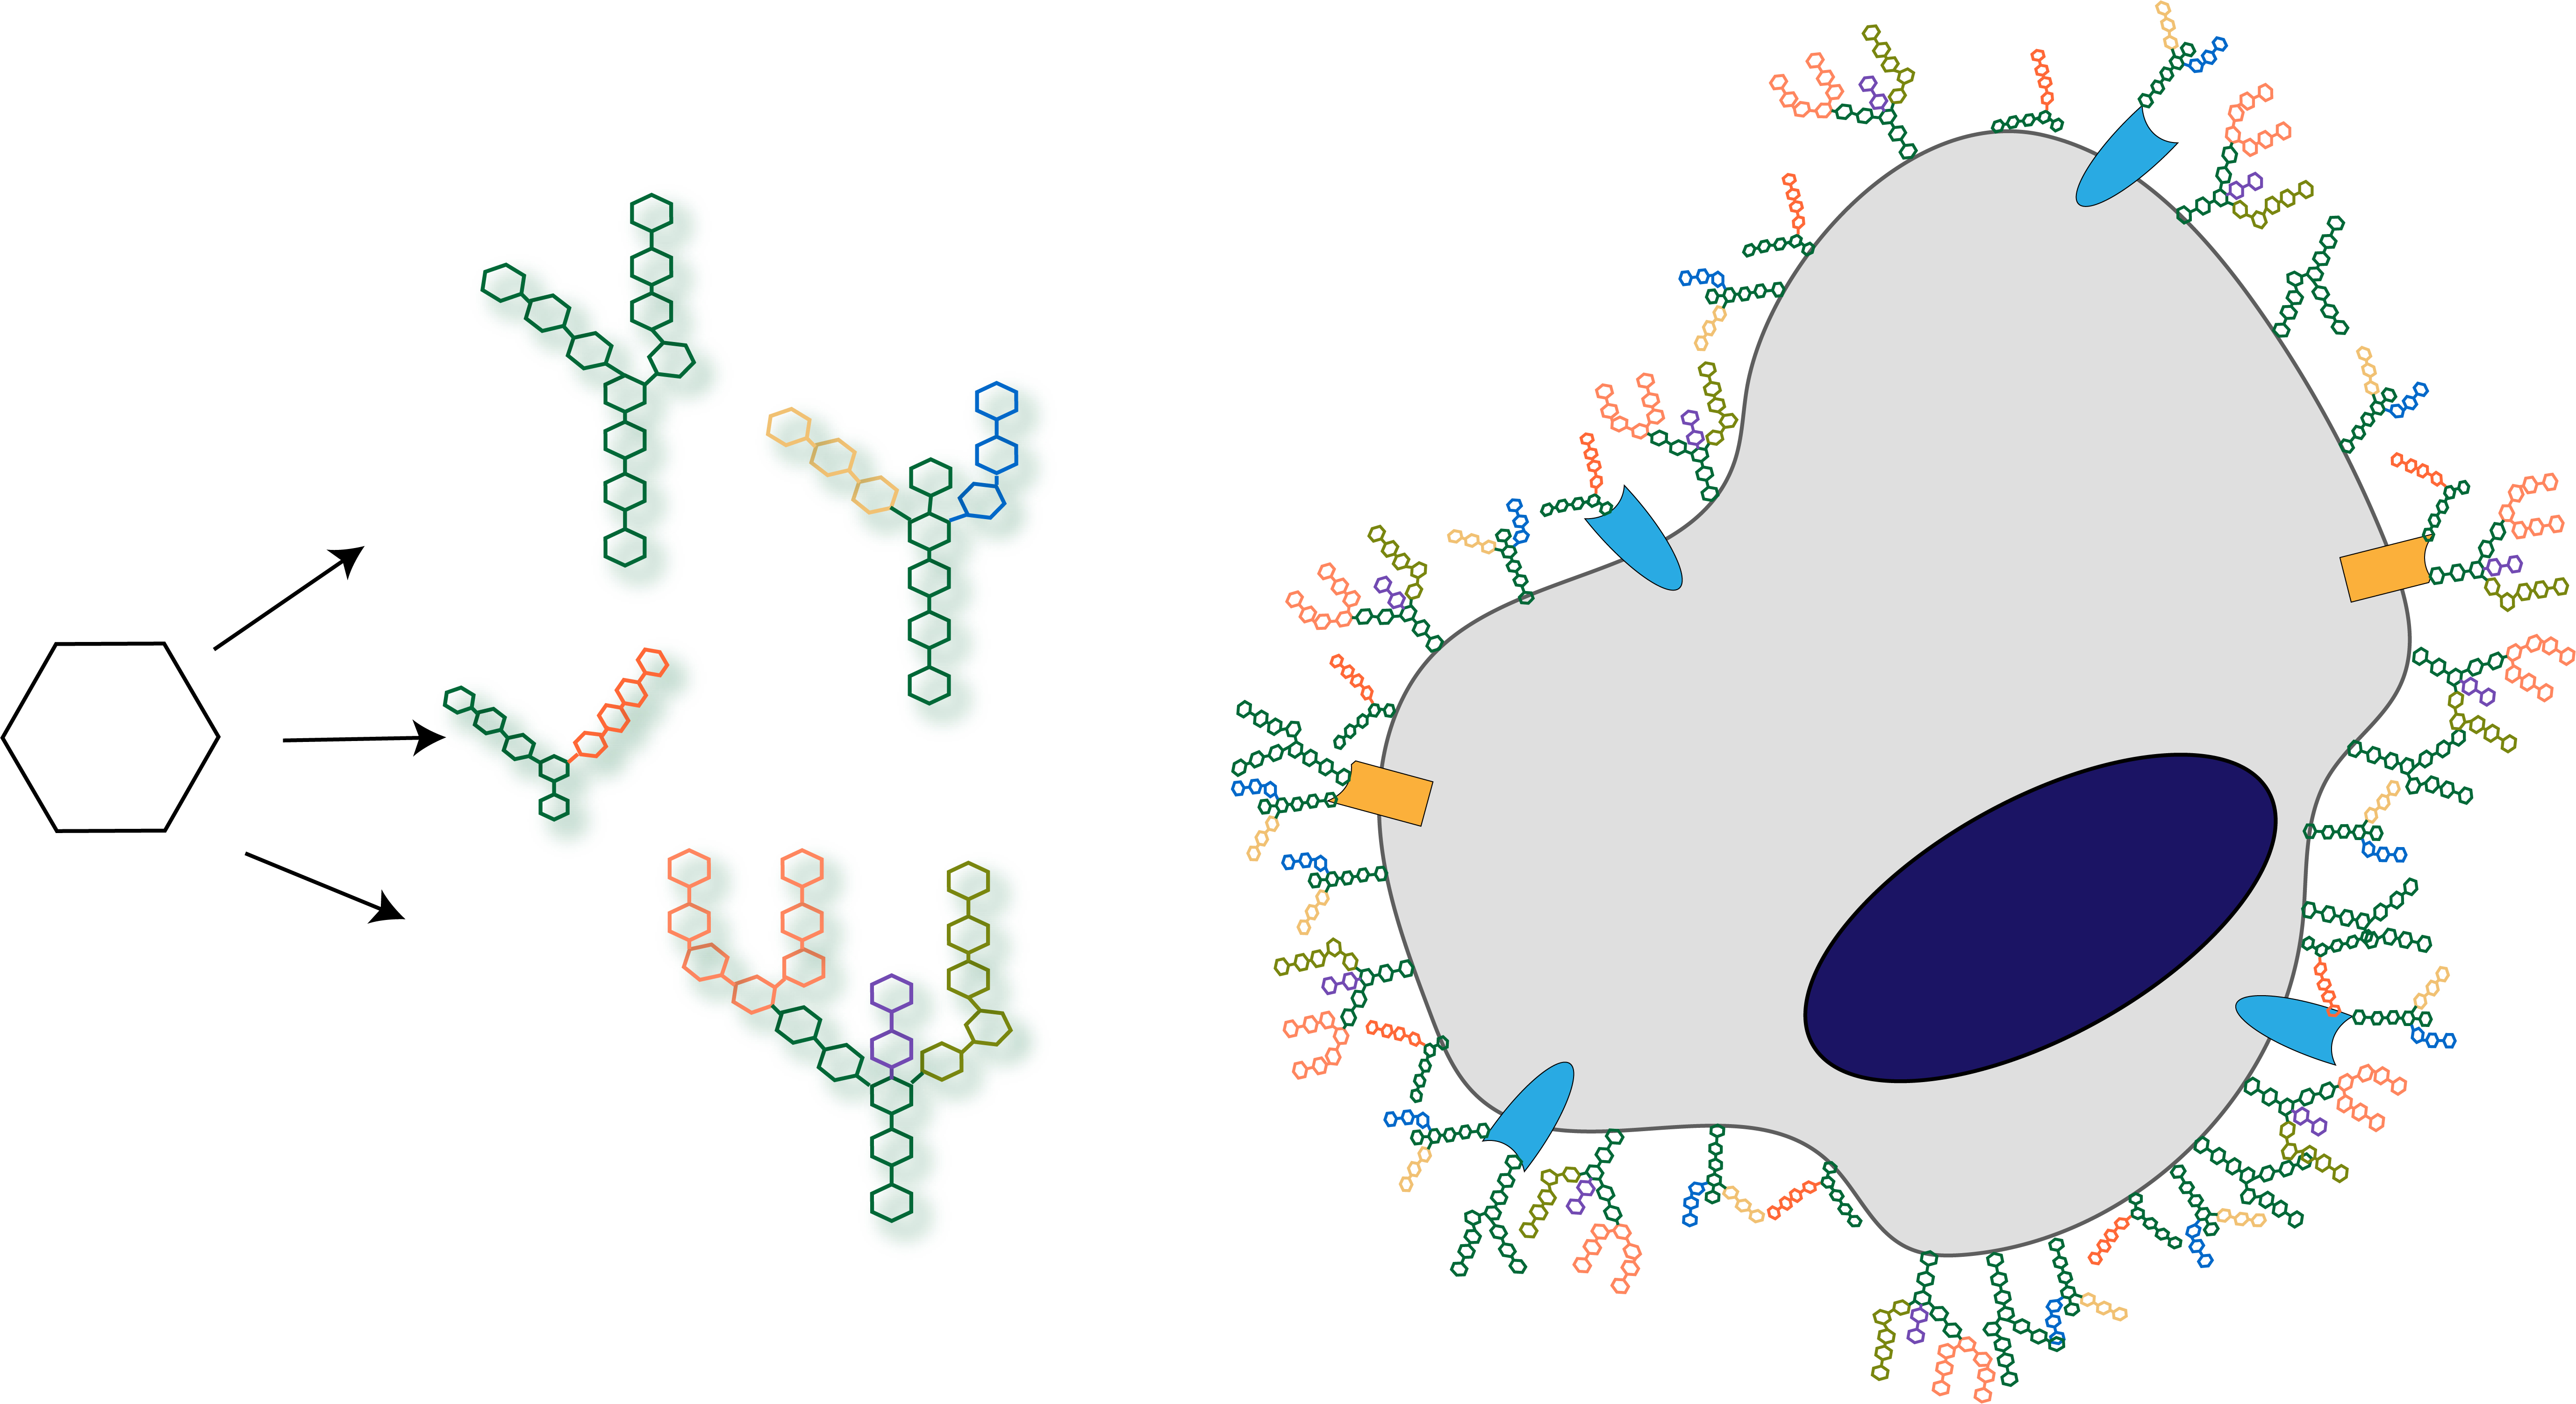 Image of glycan building blocks and a cartoon showing how glycans cover the outside of cells